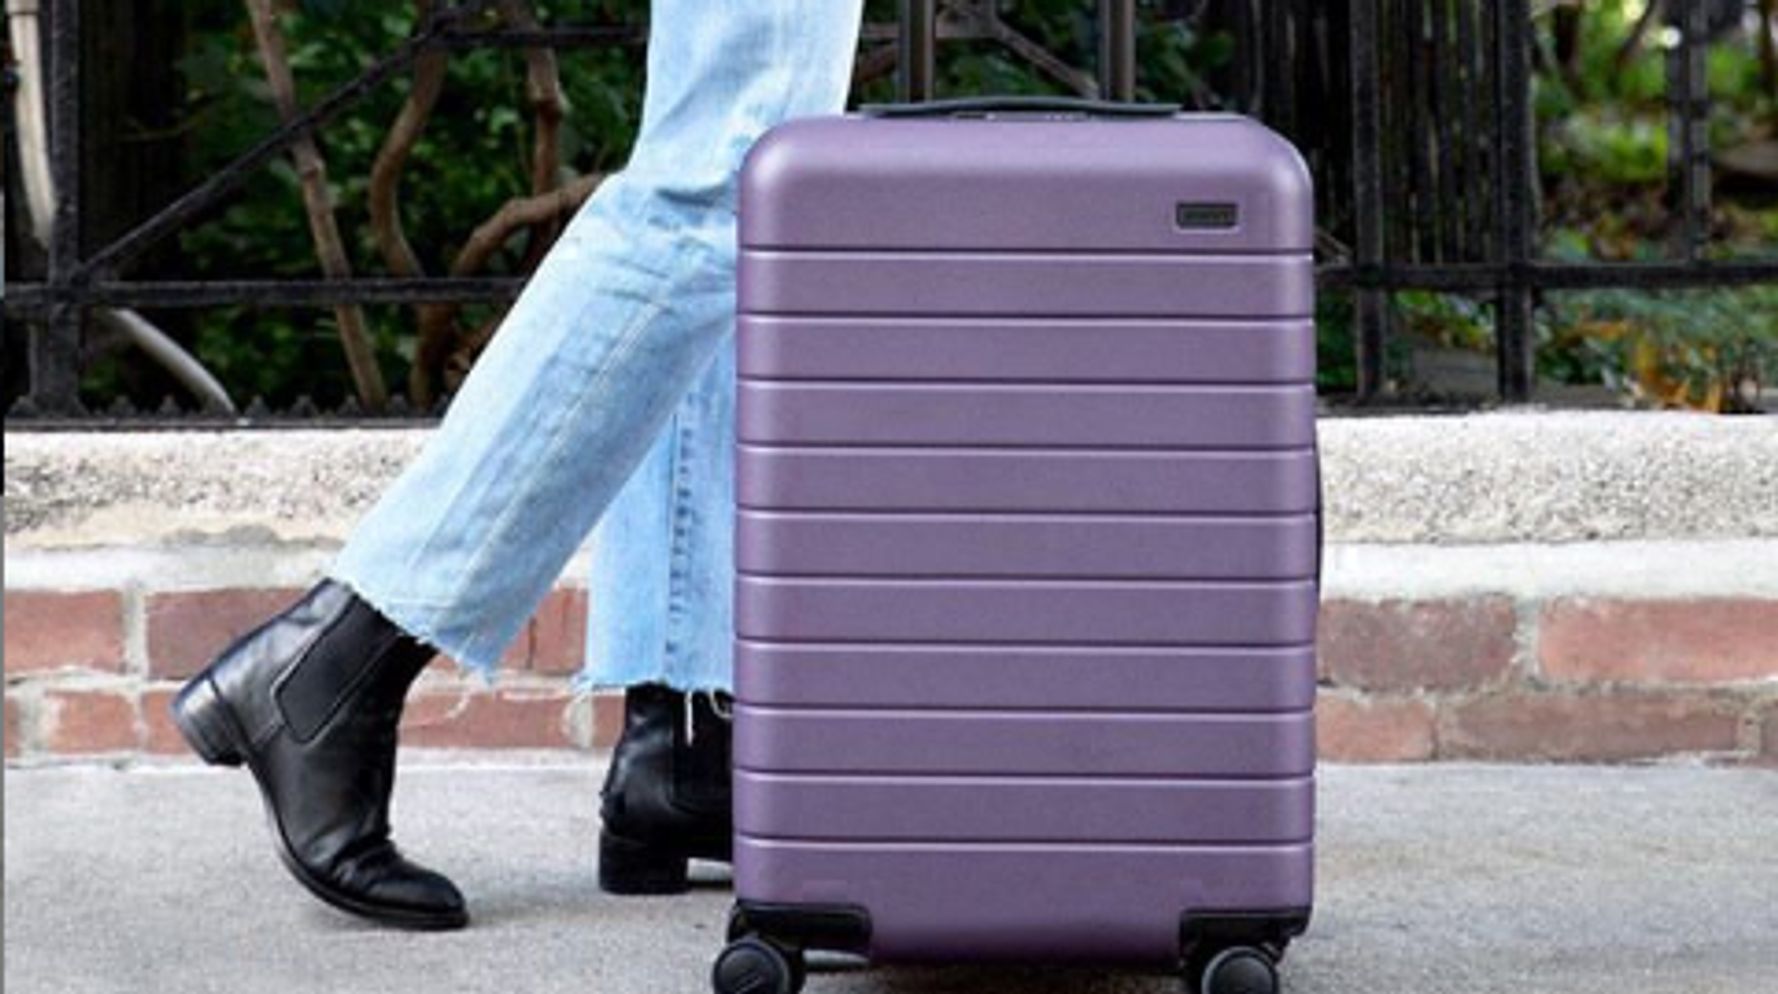 Away Luggage Review: Is This Smart Luggage Worth Your Money?